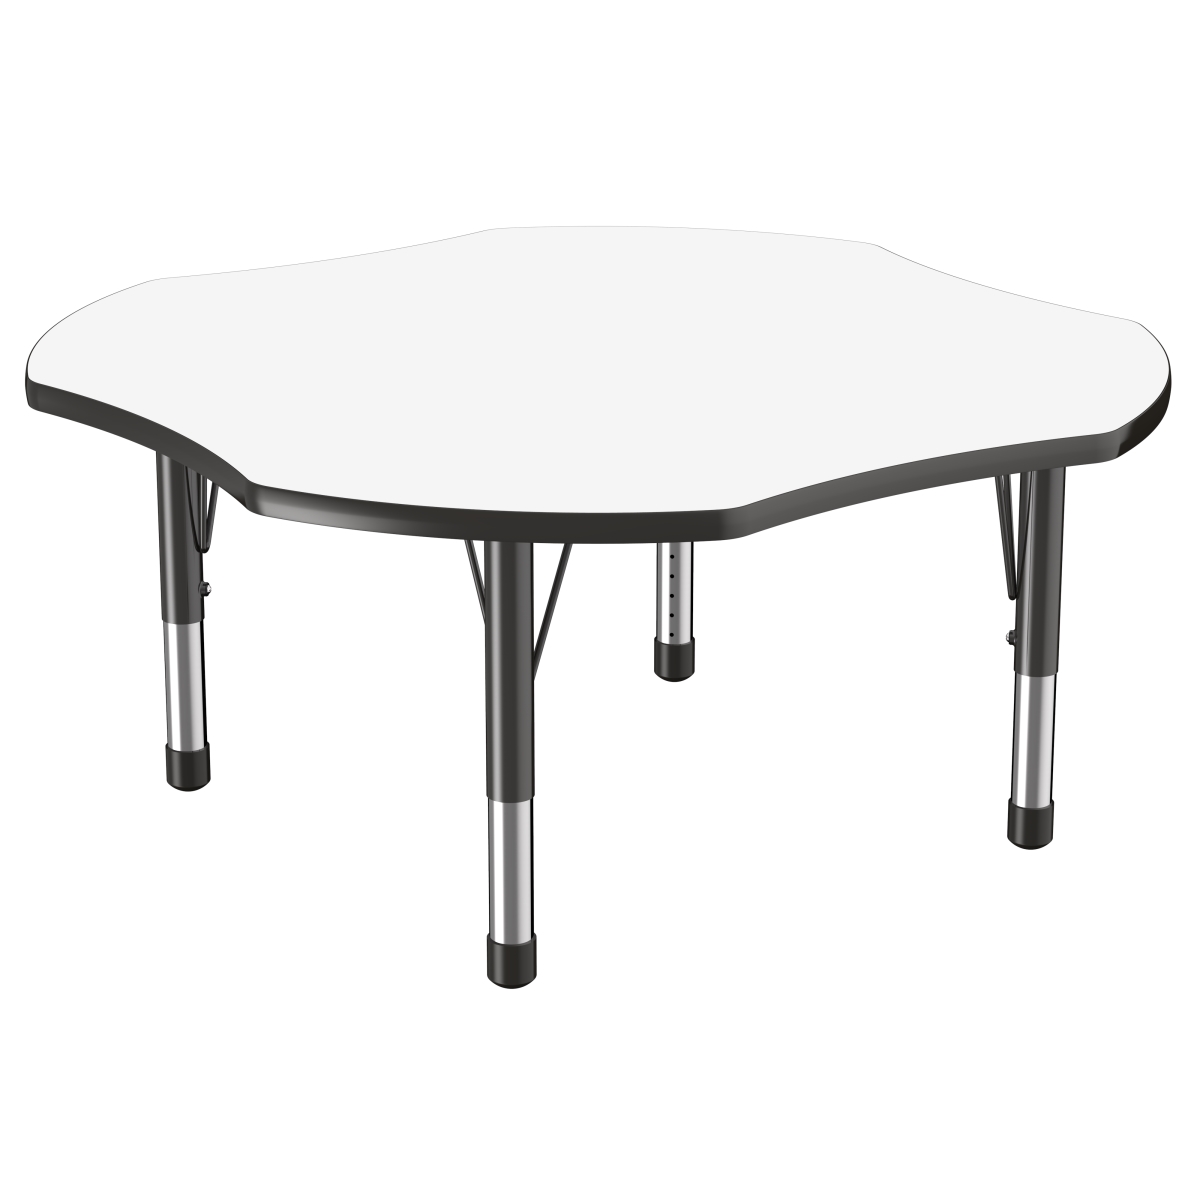 10235-debk 48 X 48 In. Clover Dry-erase Adjustable Activity Table With Chunky Leg - Black